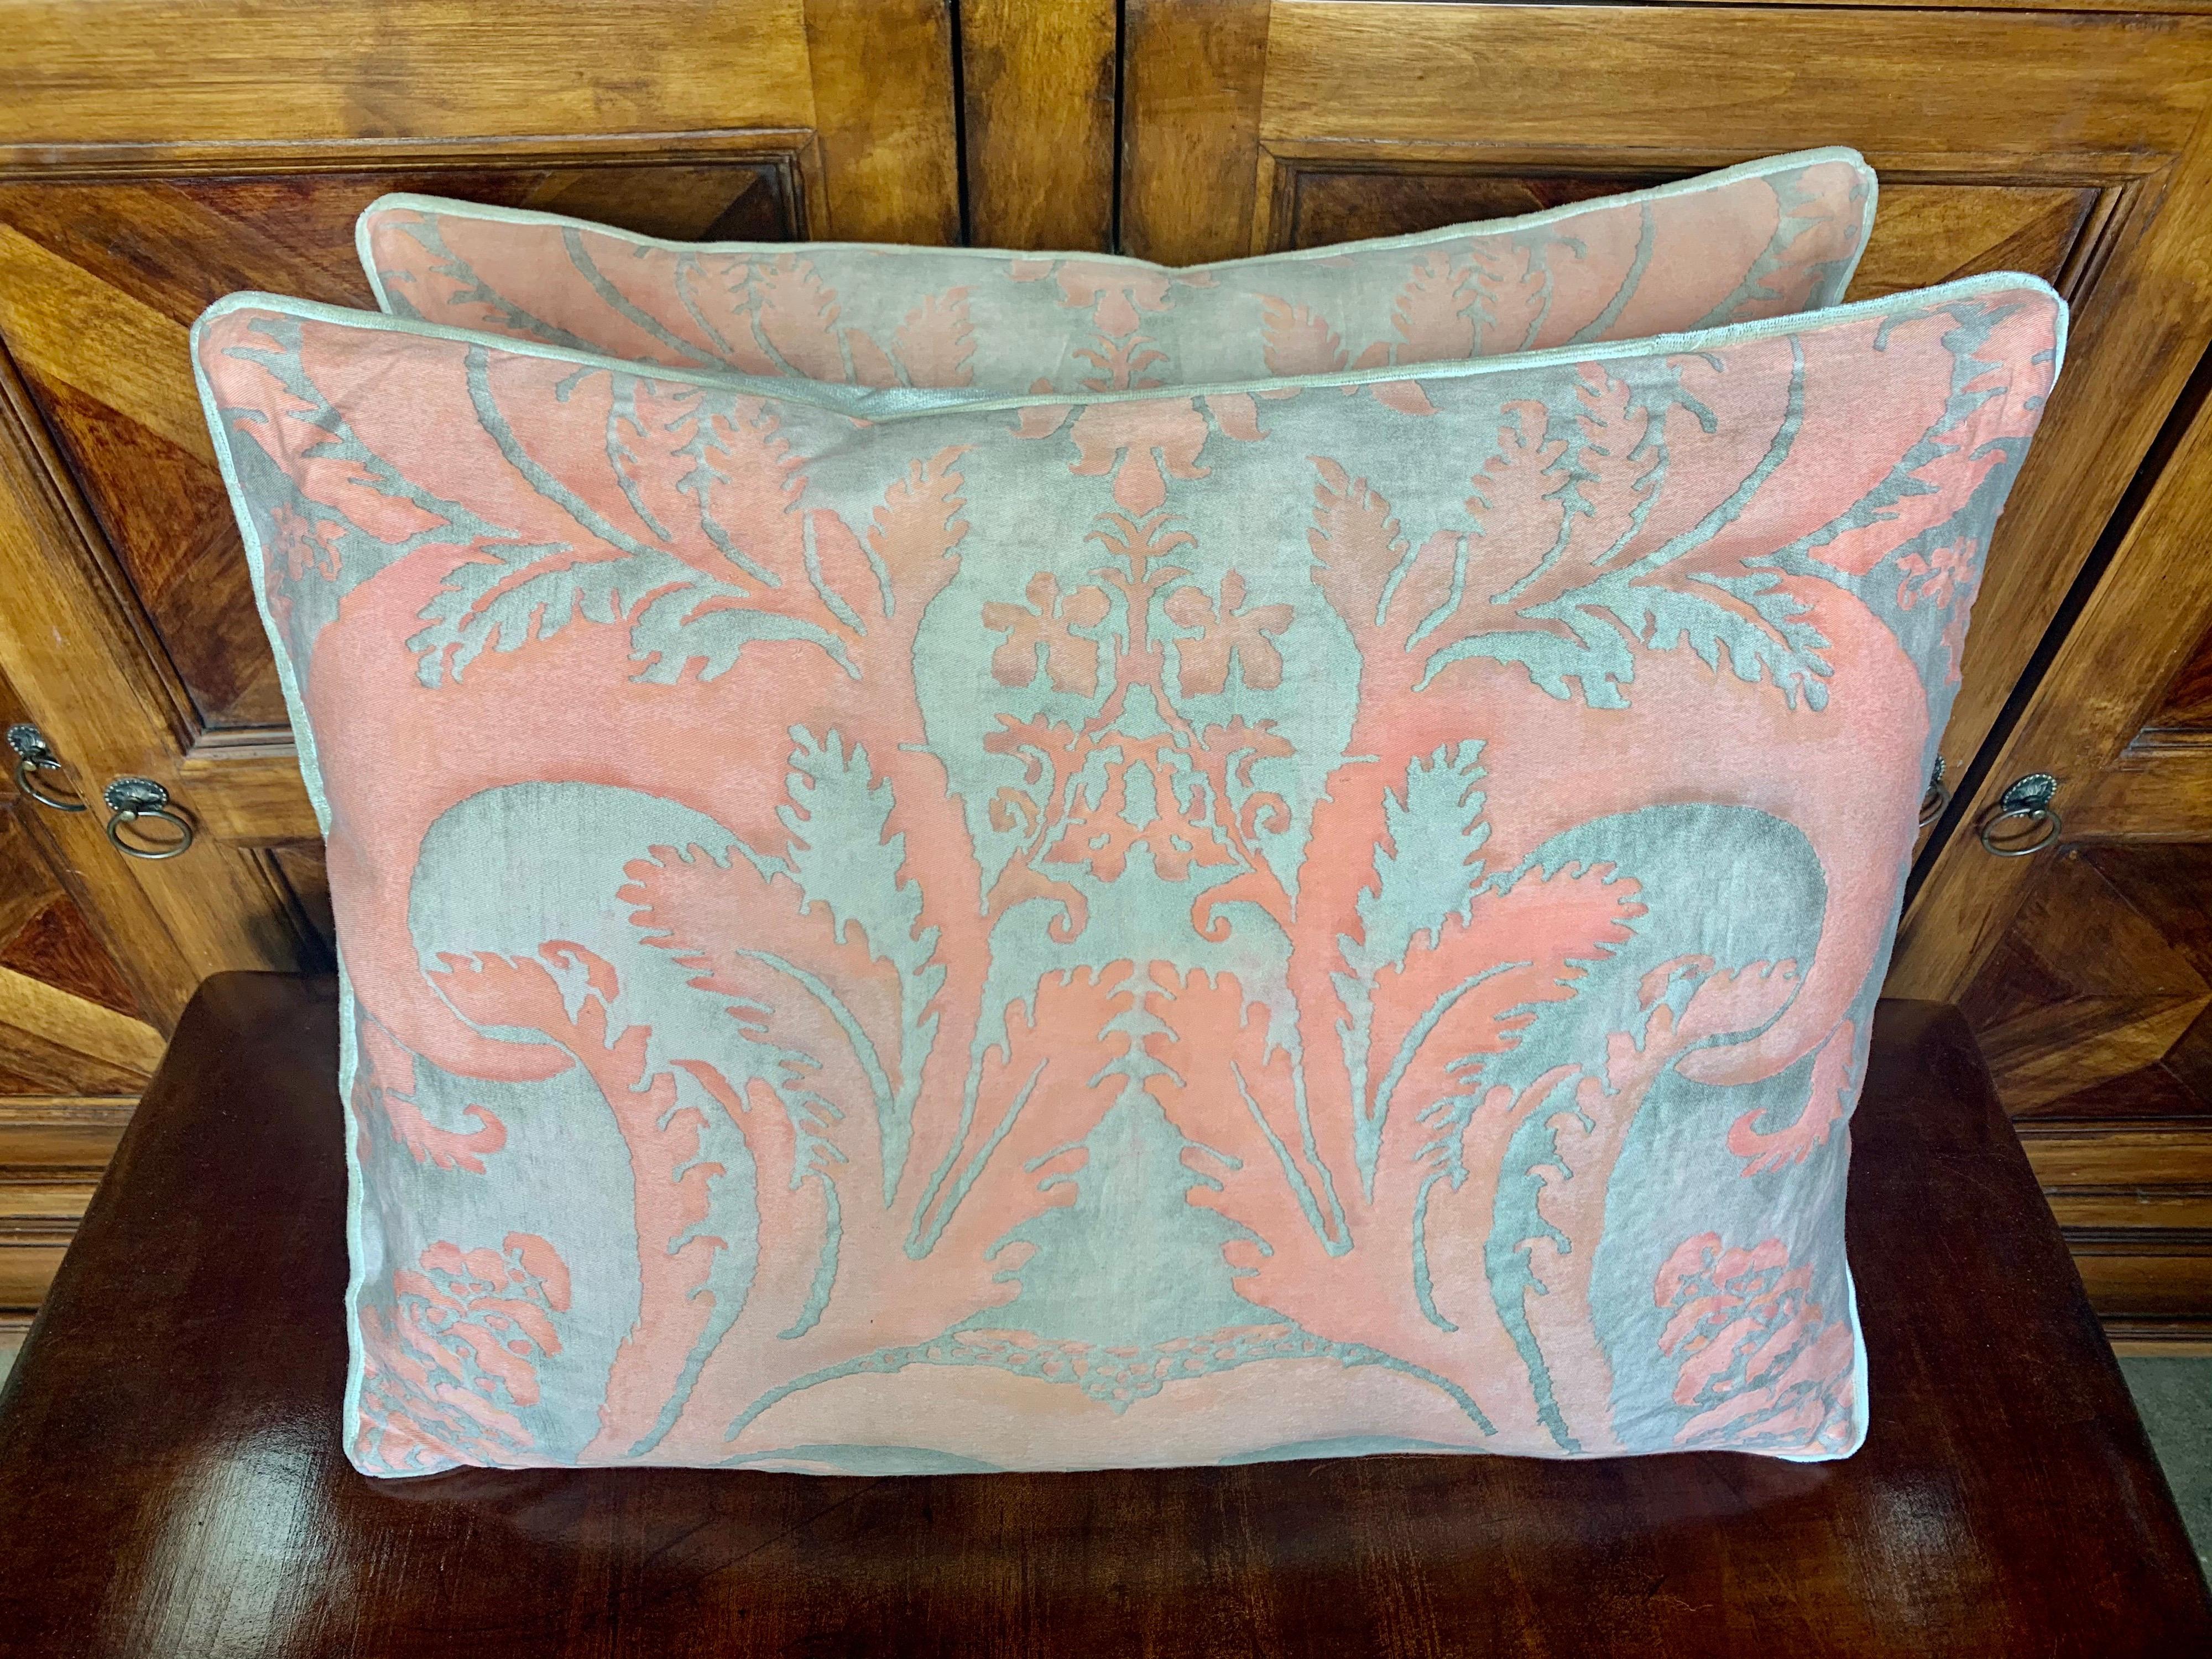 Pair of custom pillows made with soft apricot colored & gray cotton fronts combined with creamy velvet backs. Down filled inserts, sewn closed, self cording.